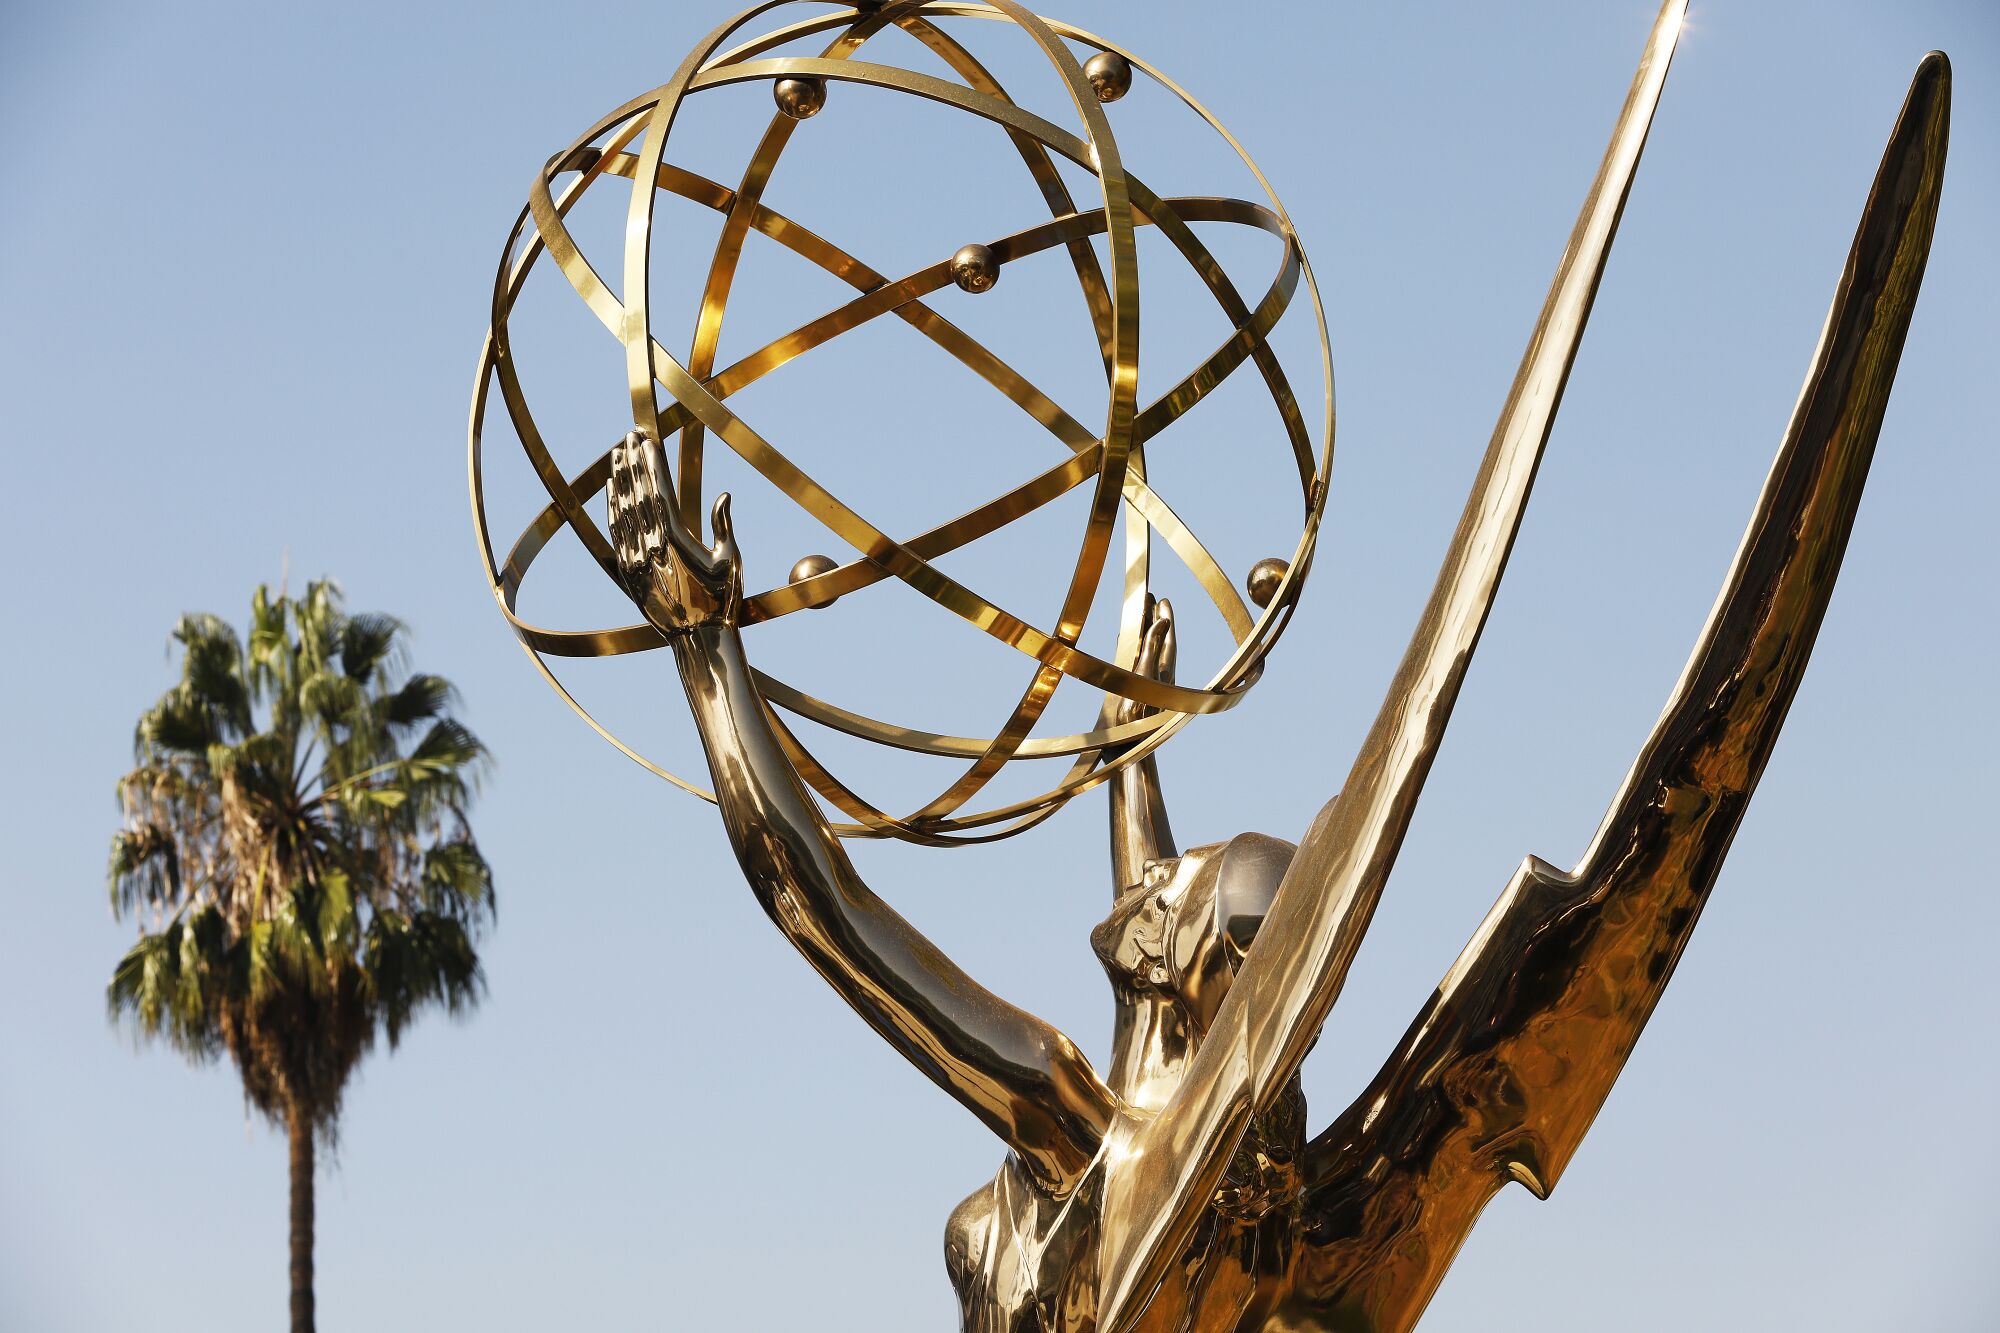 A palm tree and Emmy Awards statue